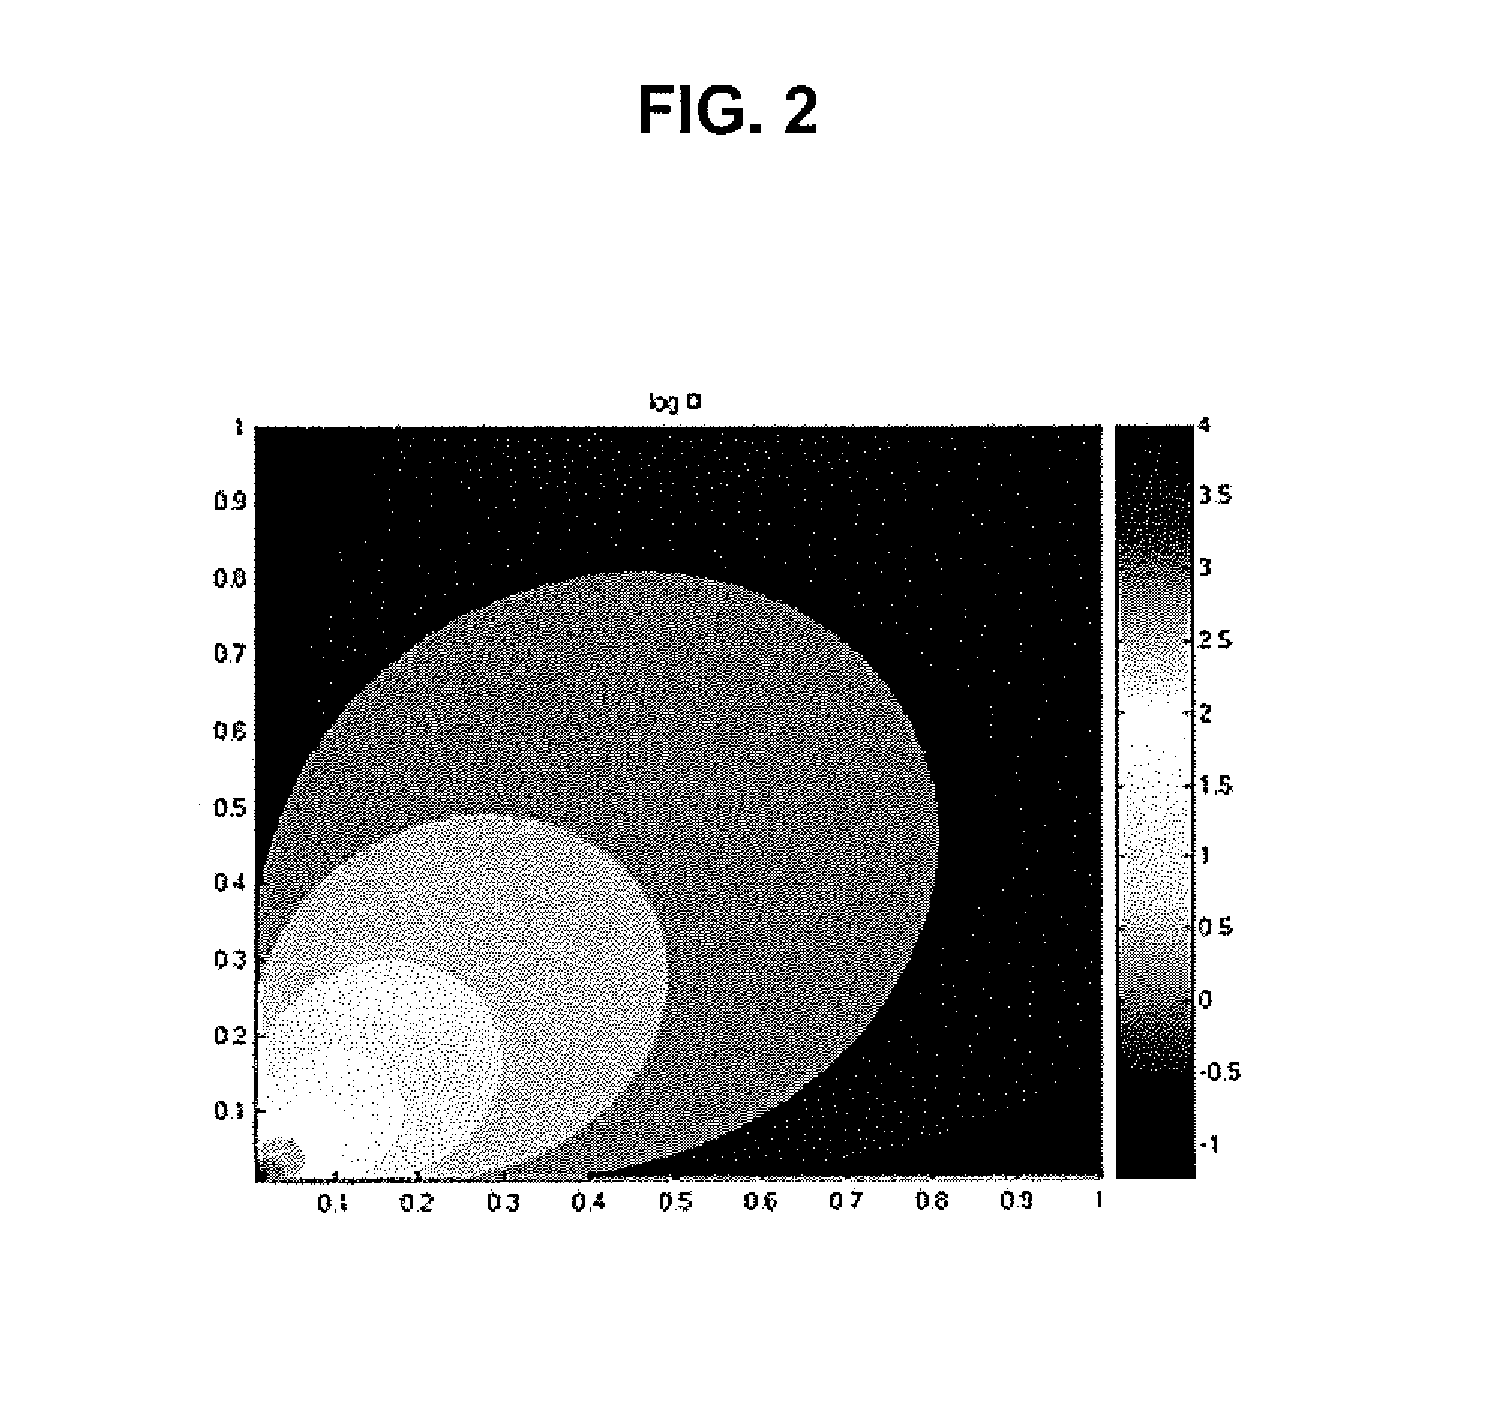 System and method for information assurance based on thermal analysis techniques